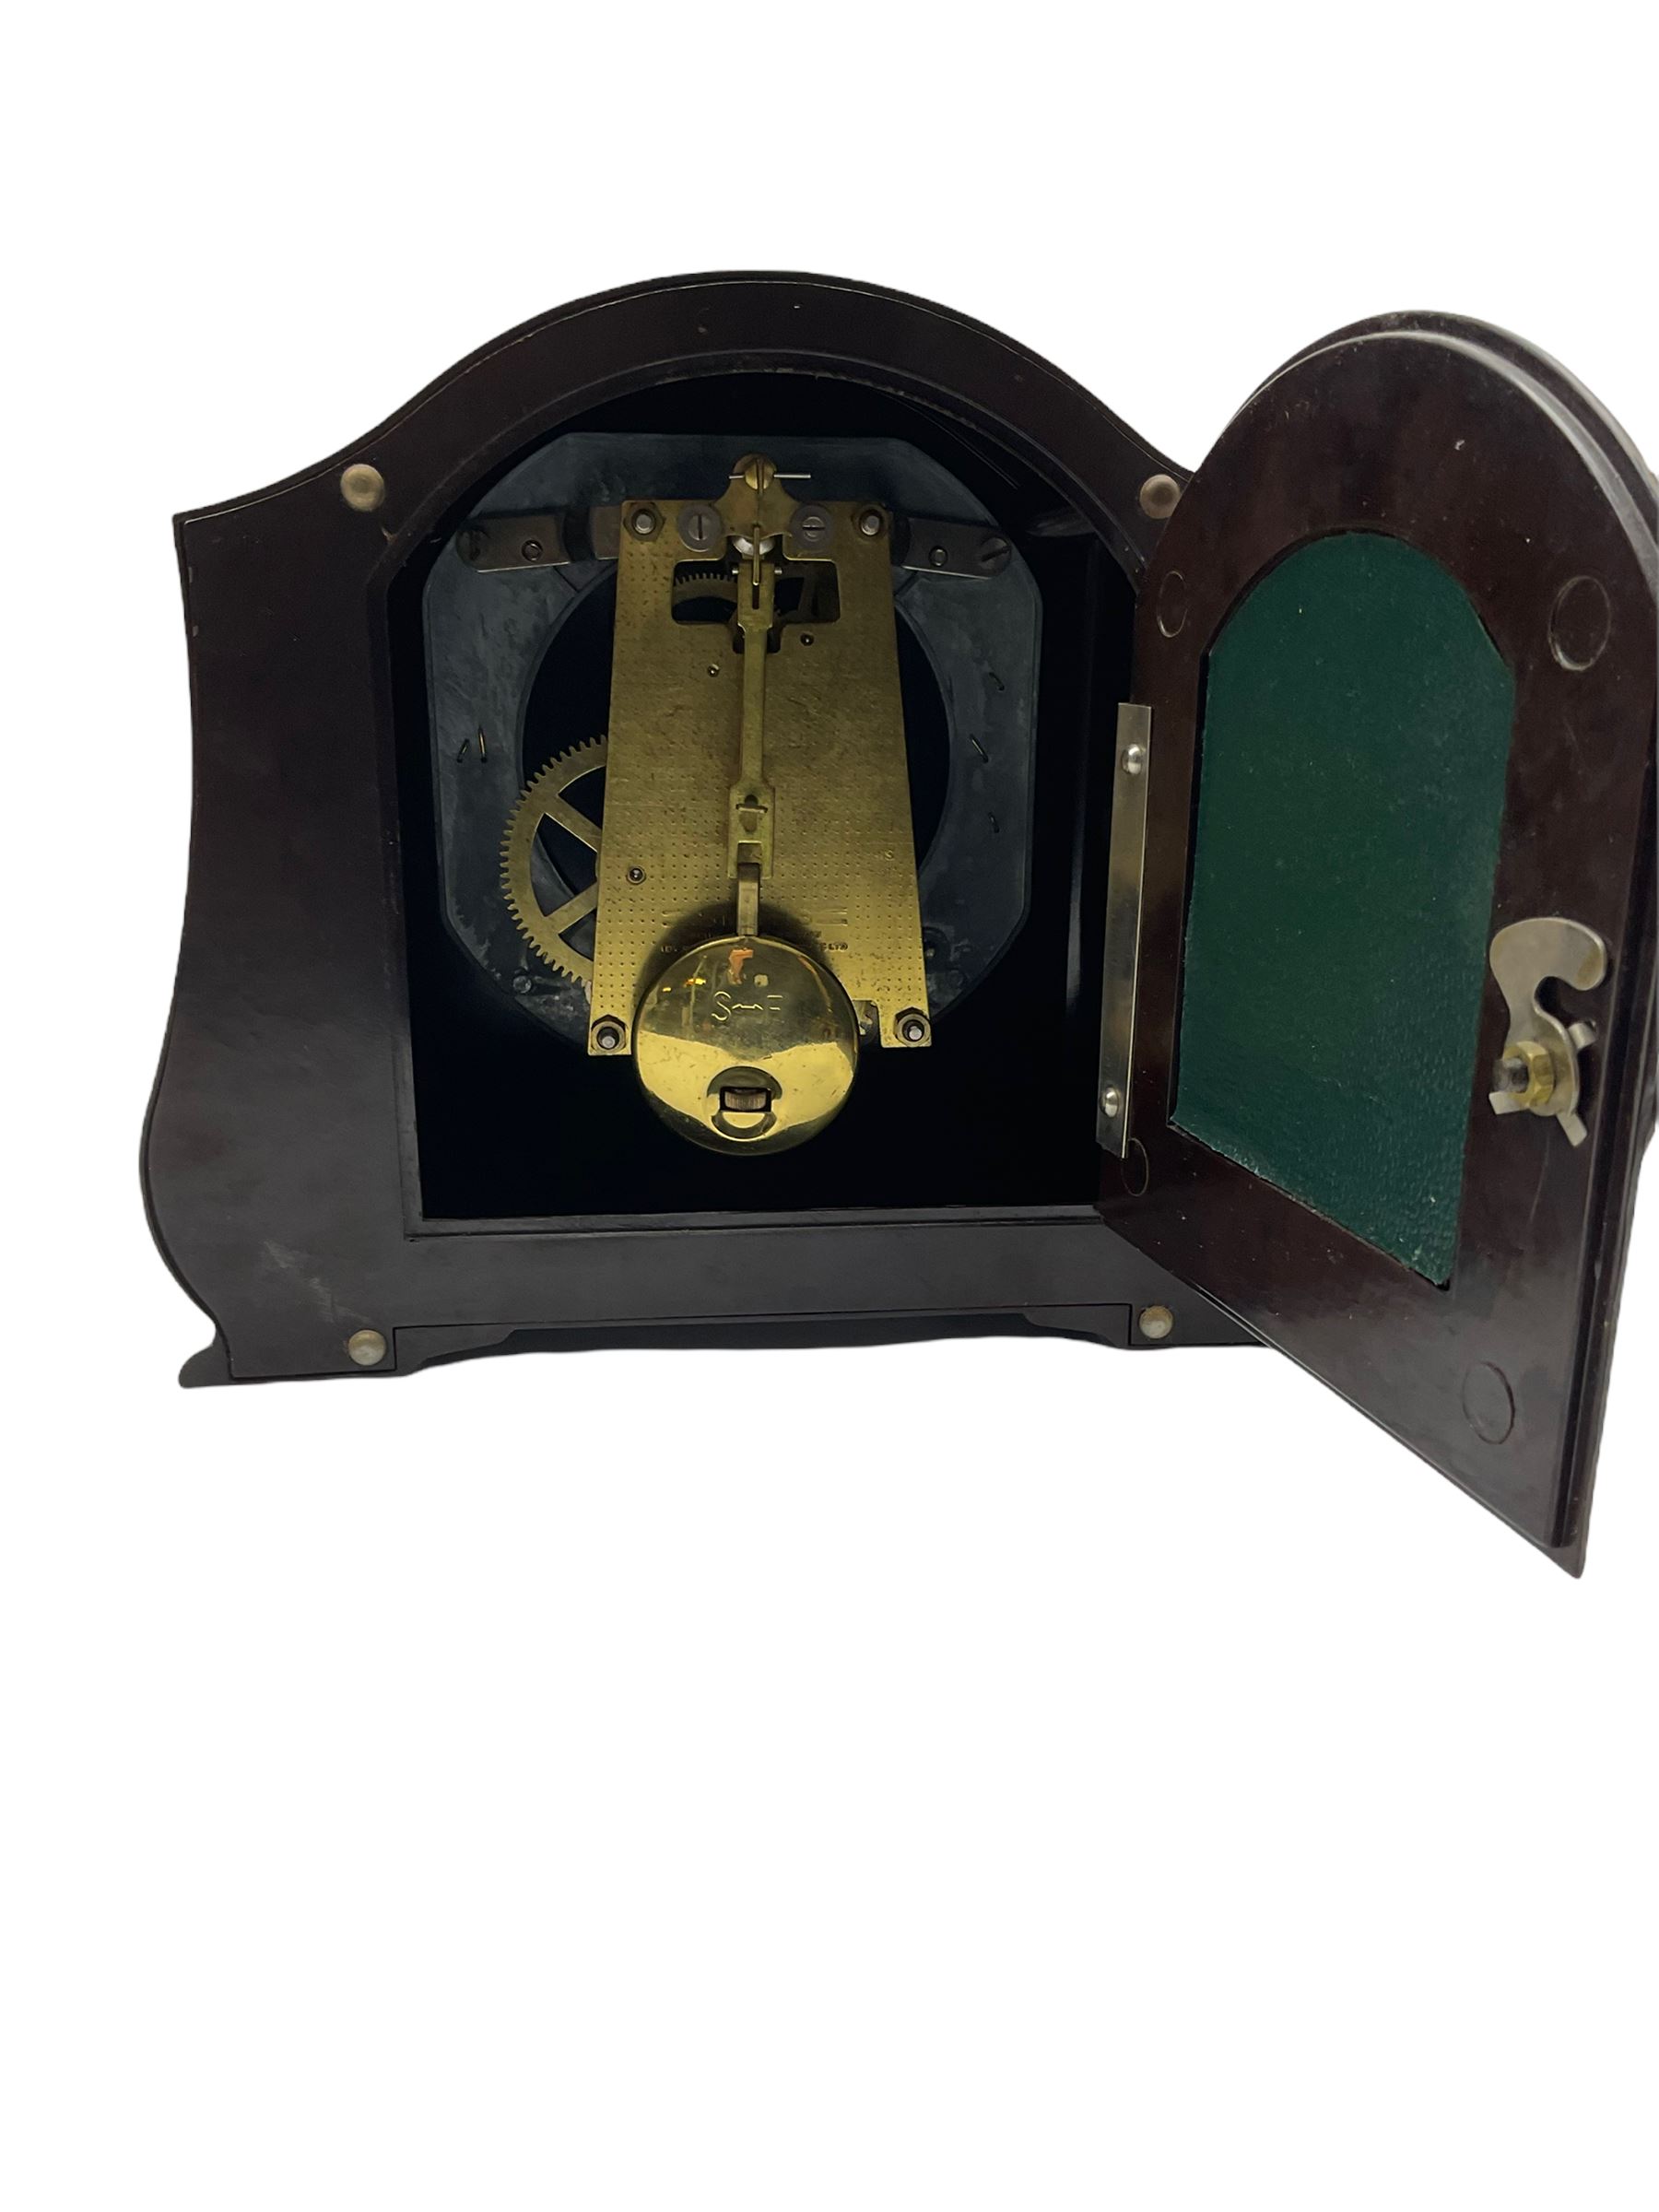 A Retro Art-Deco 1950's Bakelite cased mantel clock with a Smiths timepiece movement housed in a dom - Image 3 of 3